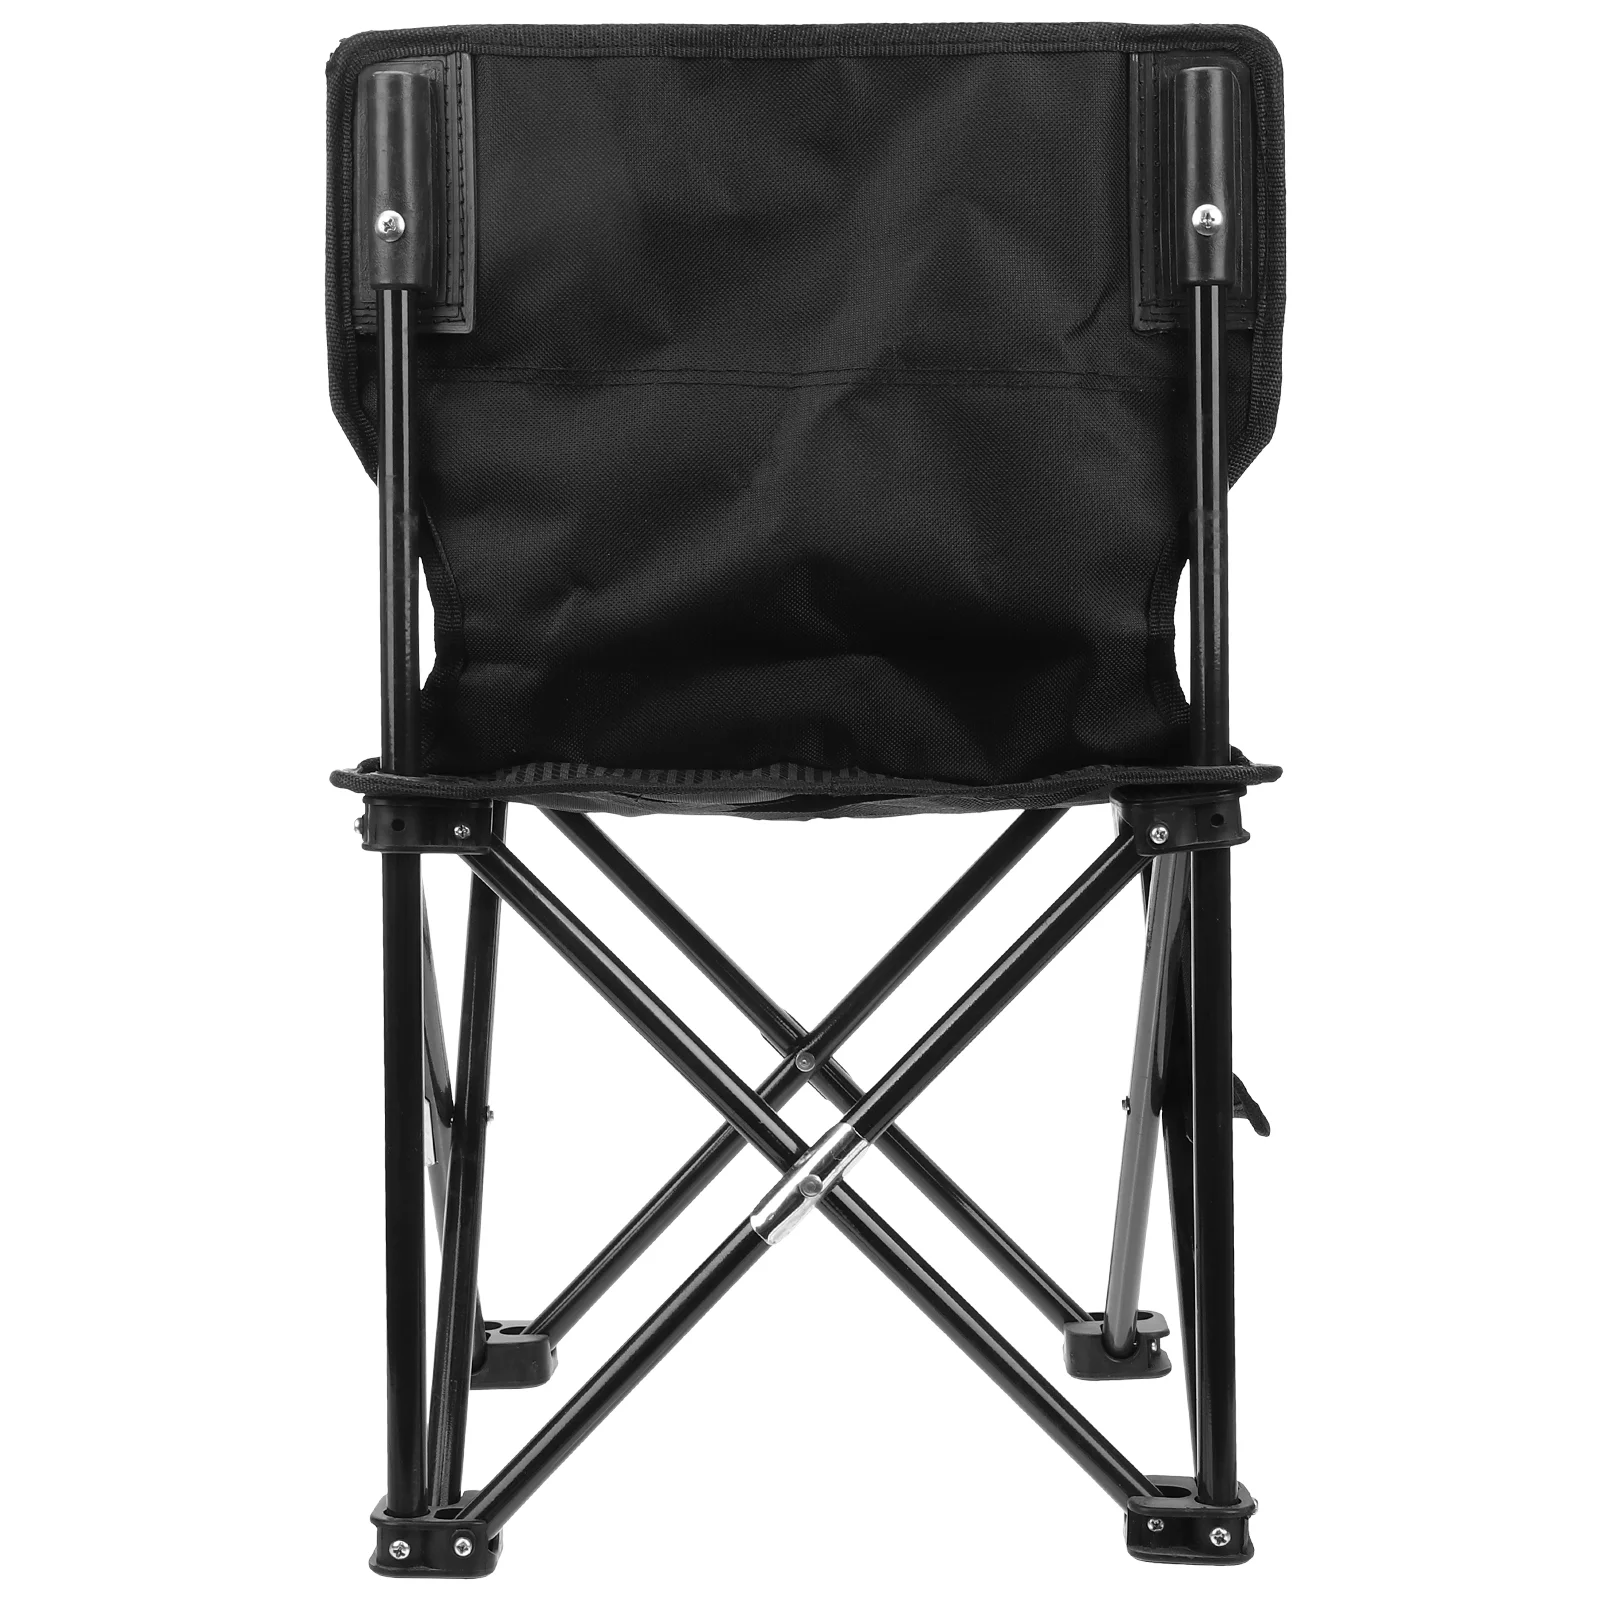 

Portable Folding Camping Chair with Carry Bag Collapsible Oxford Cloth Chair